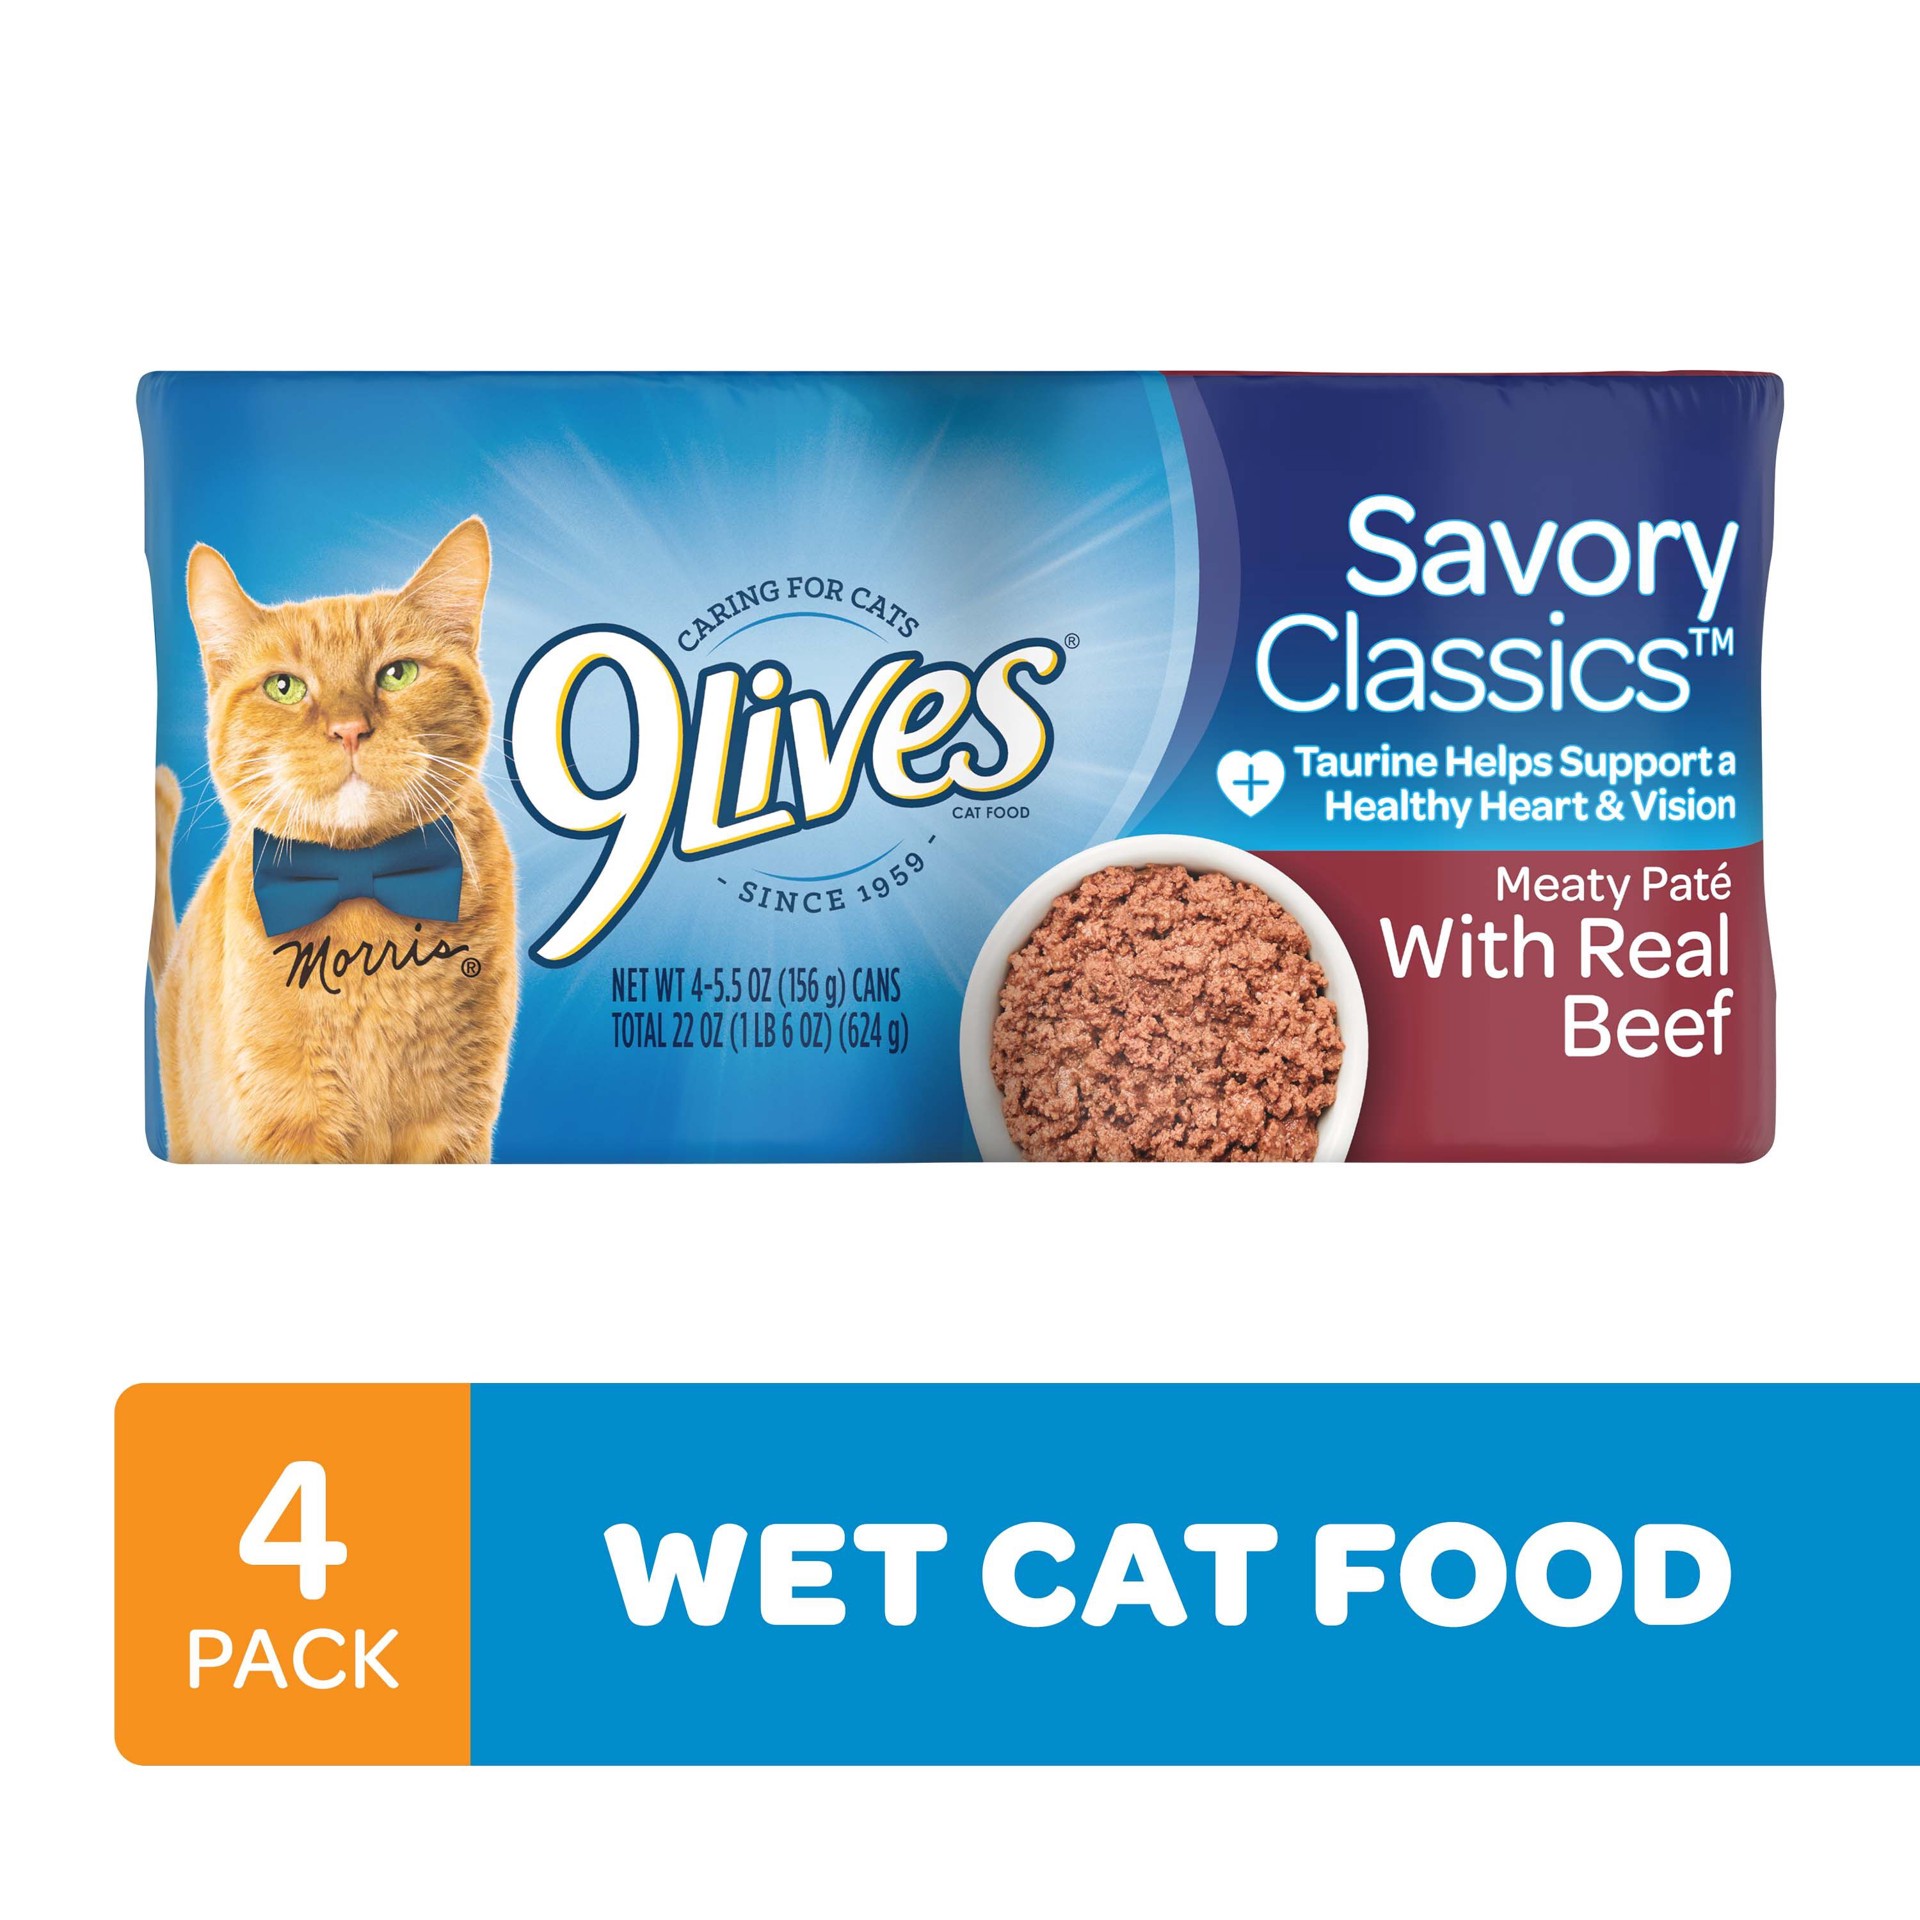 slide 4 of 6, 9Lives Meaty Paté With Real Beef Wet Cat Food, 22-Ounce, Pack of 4, 22 oz